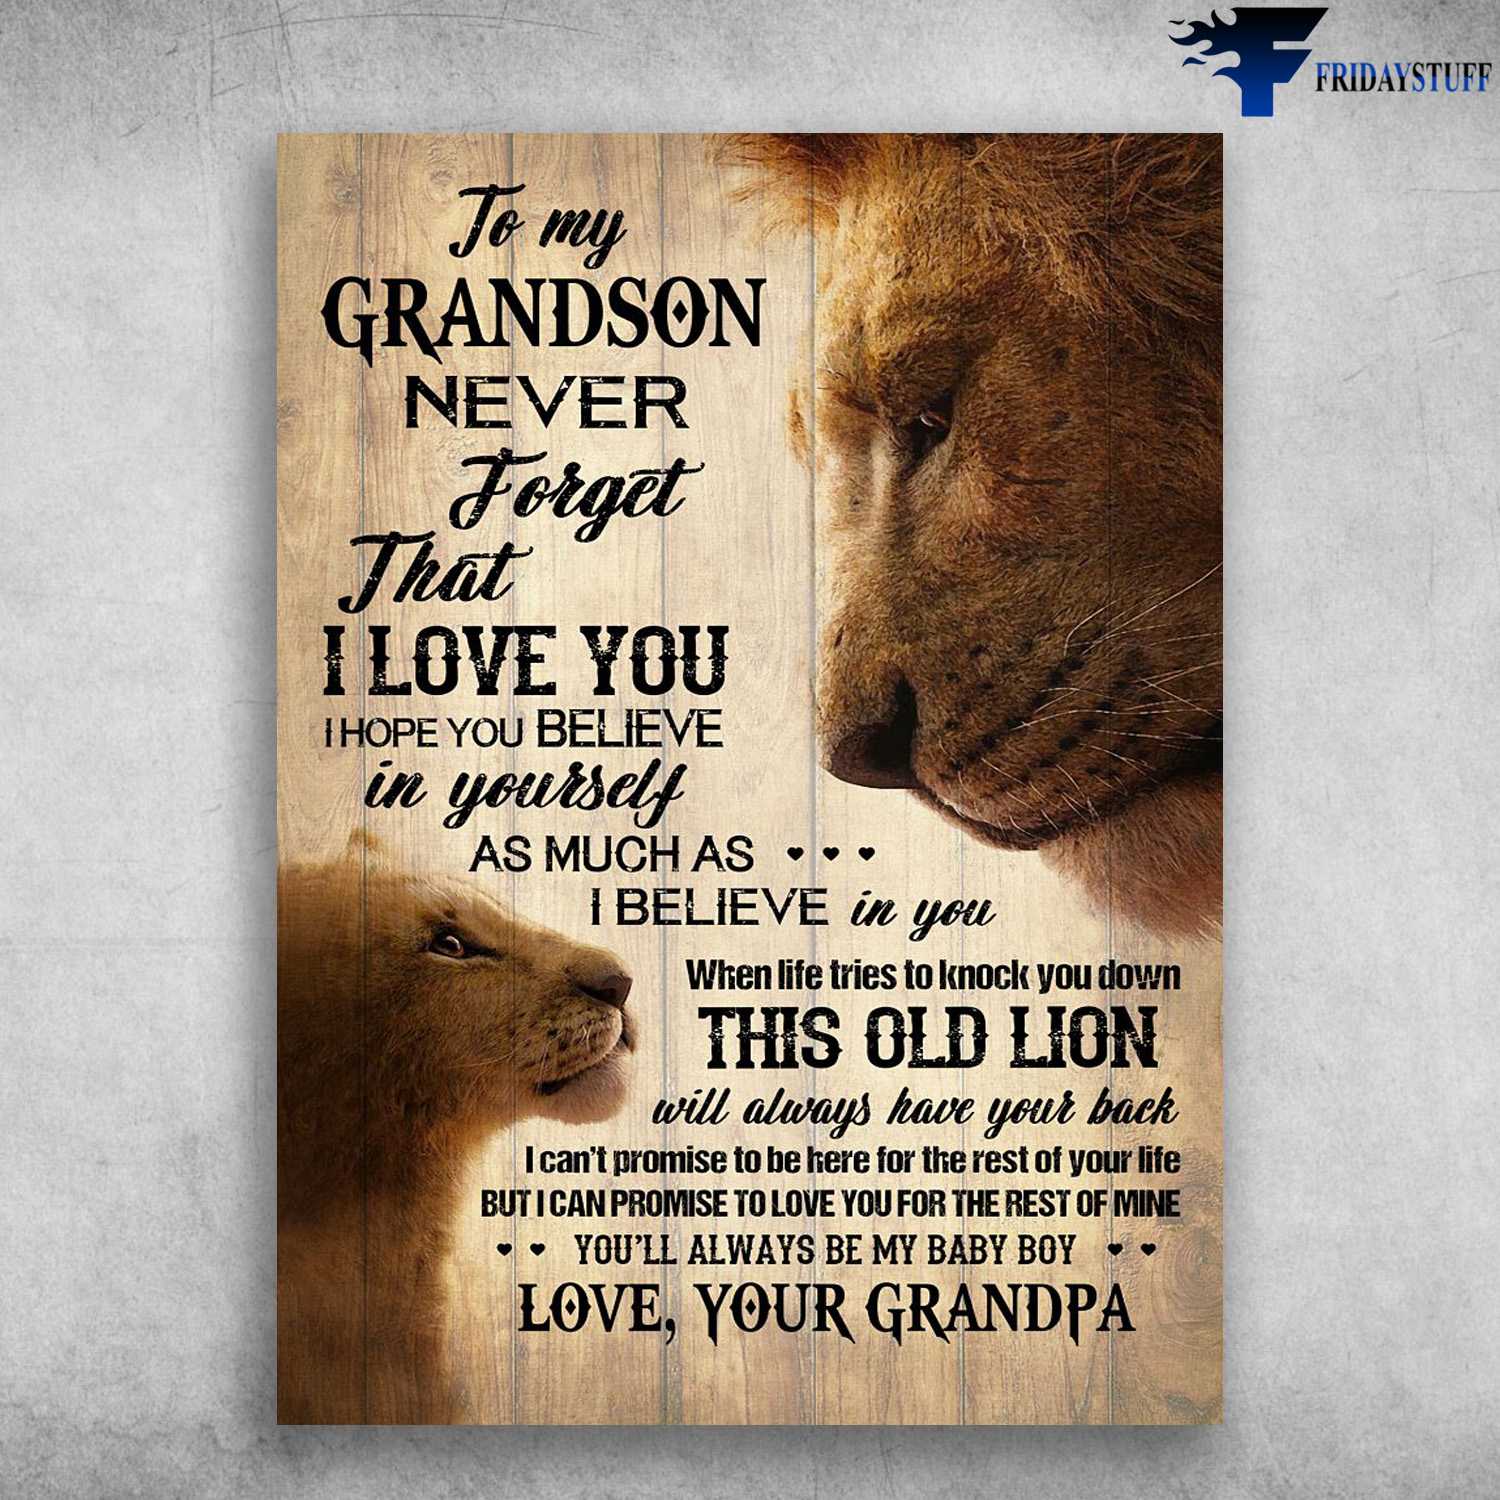 Grandpa Grandson, To My Grandson, Never Forget that I Love You, I Hopw You Believe In Yourself, As Much As I Believe In You